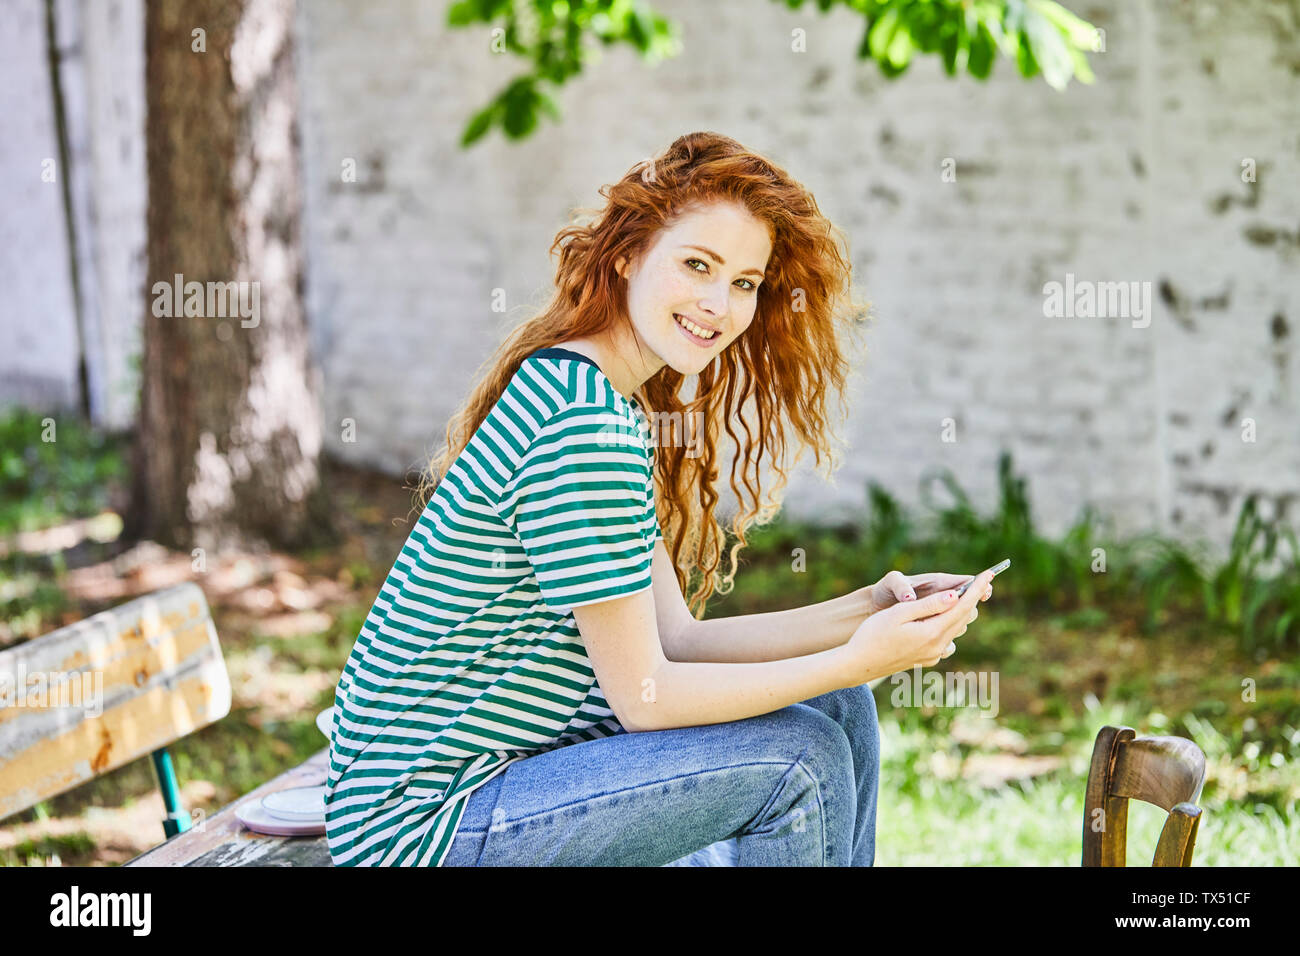 Portrait of smiling redheaded young woman with smartphone sitting on bench in the garden Stock Photo